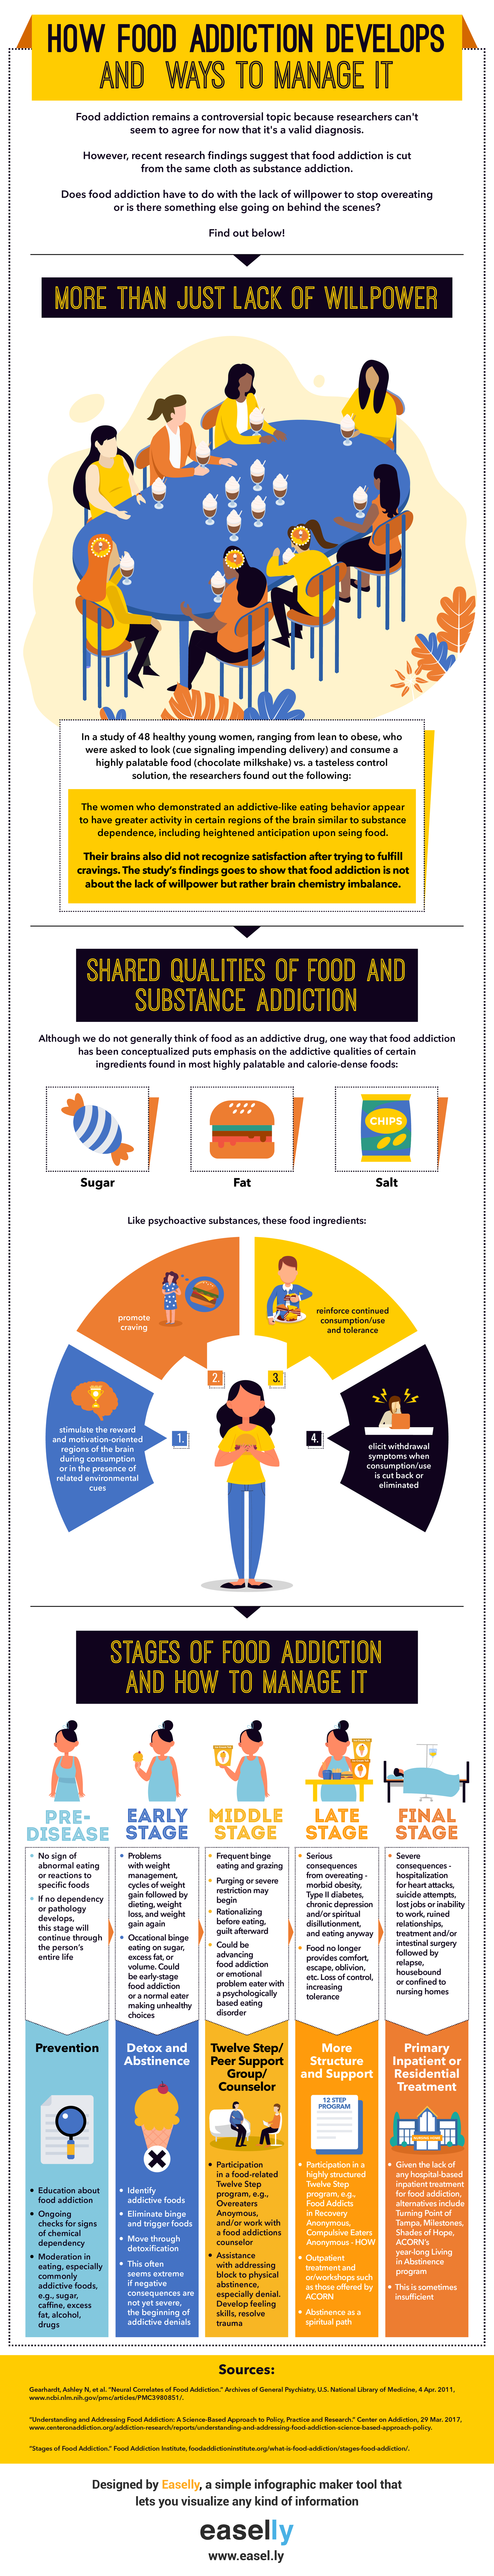 How to Overcome Food Addiction Infographic